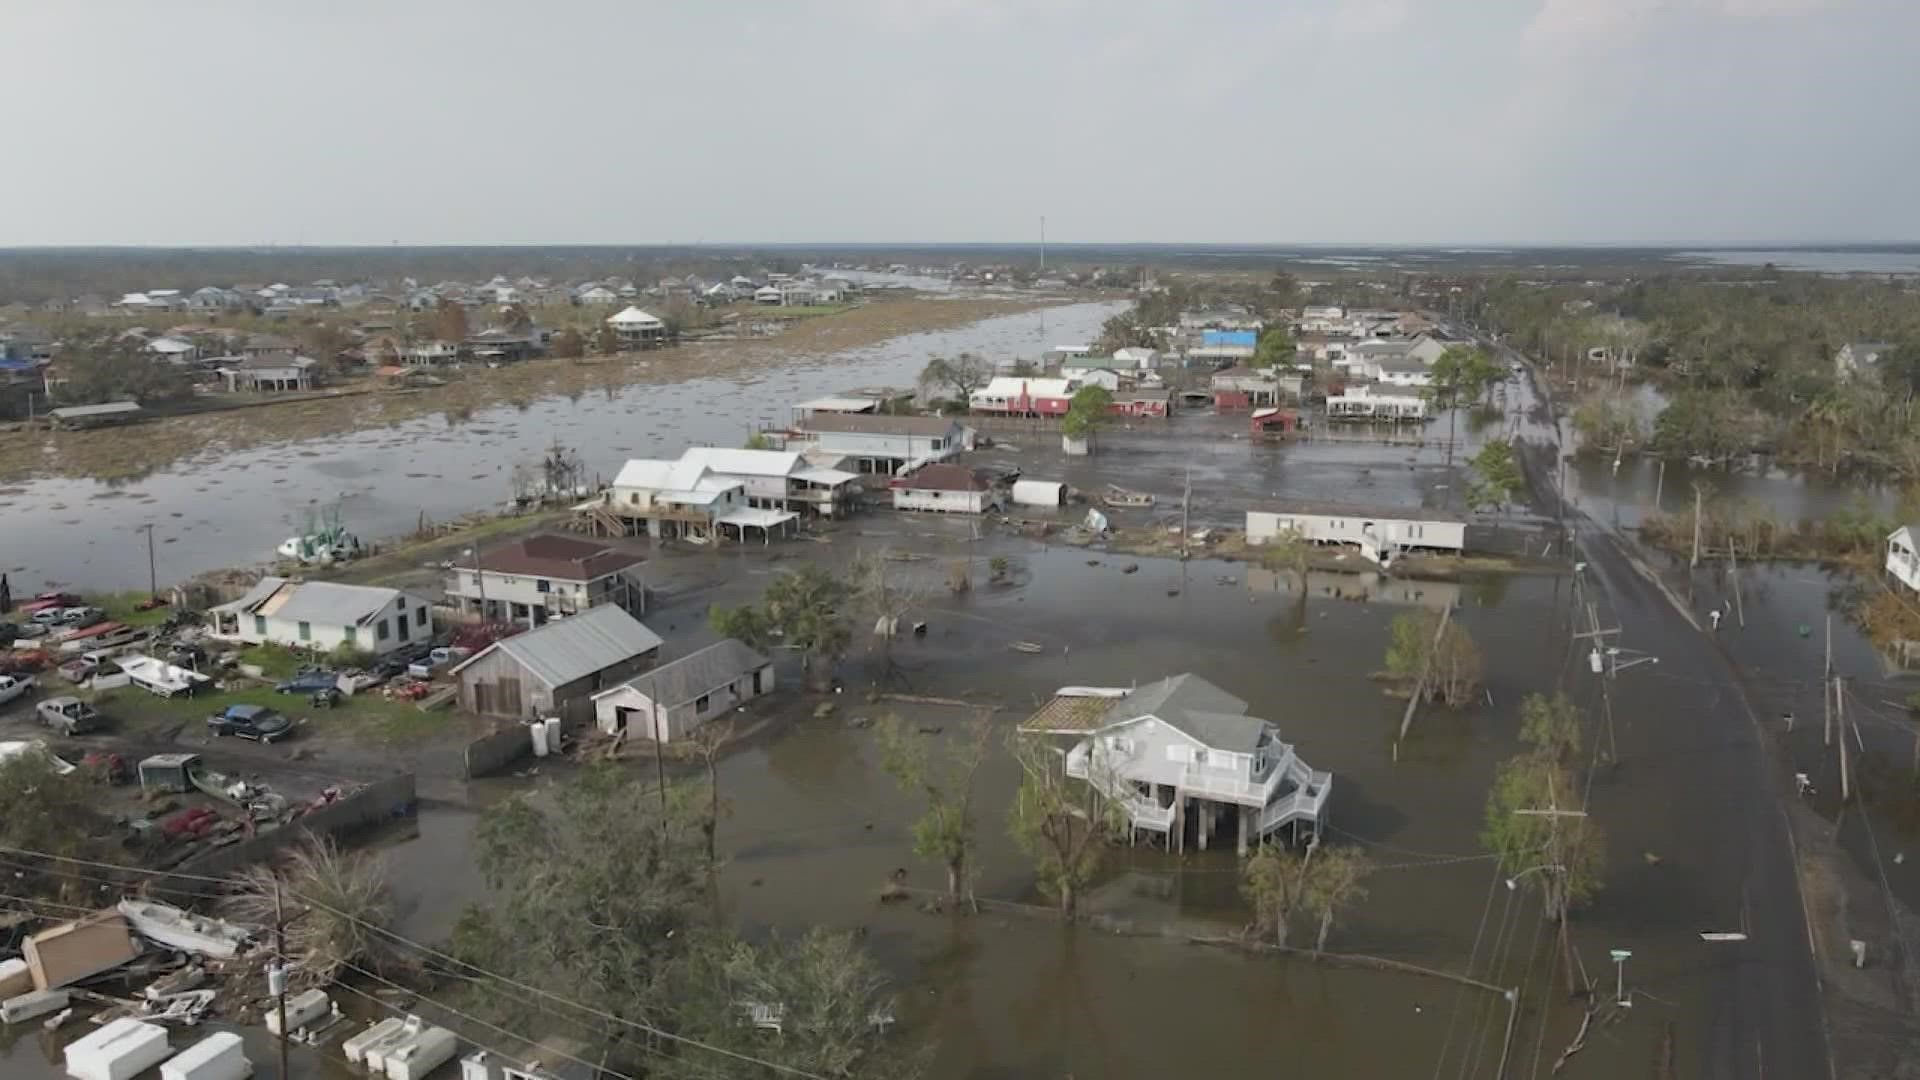 Parish leaders are concerned the cost of flood insurance will soon be out of reach for many families, particularly those living in flood-prone areas.